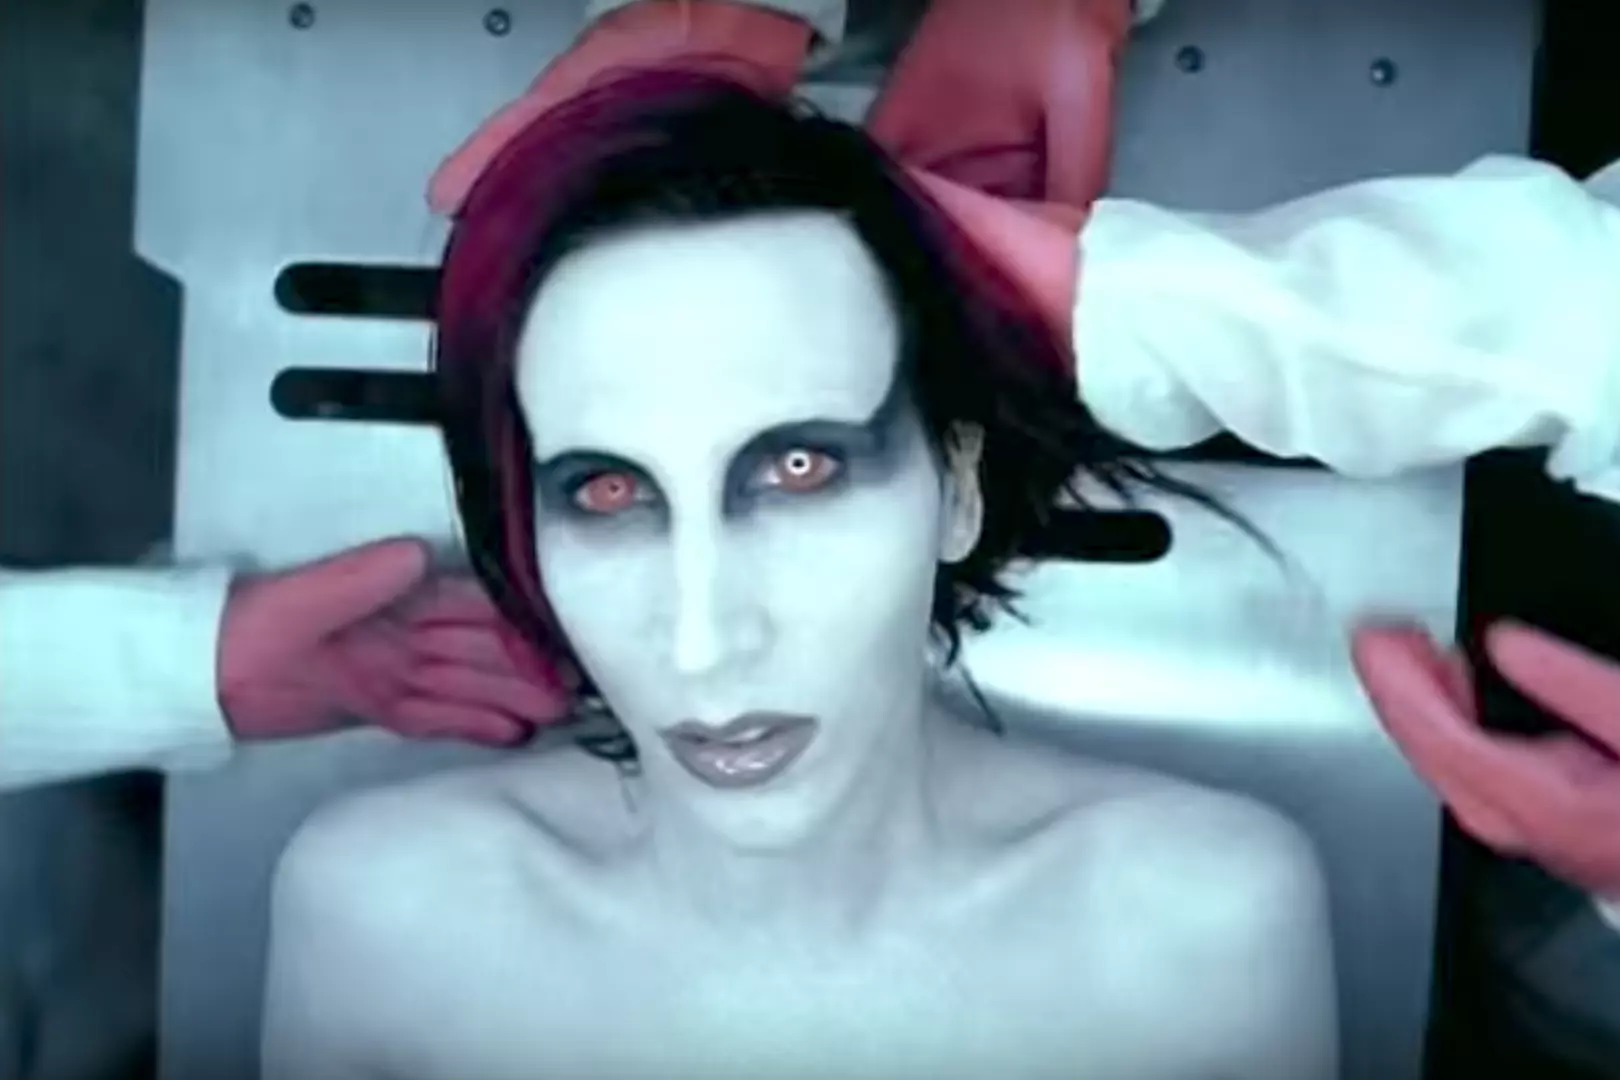 22 Years Ago: Marilyn Manson Goes Glam With 'Mechanical Animals'